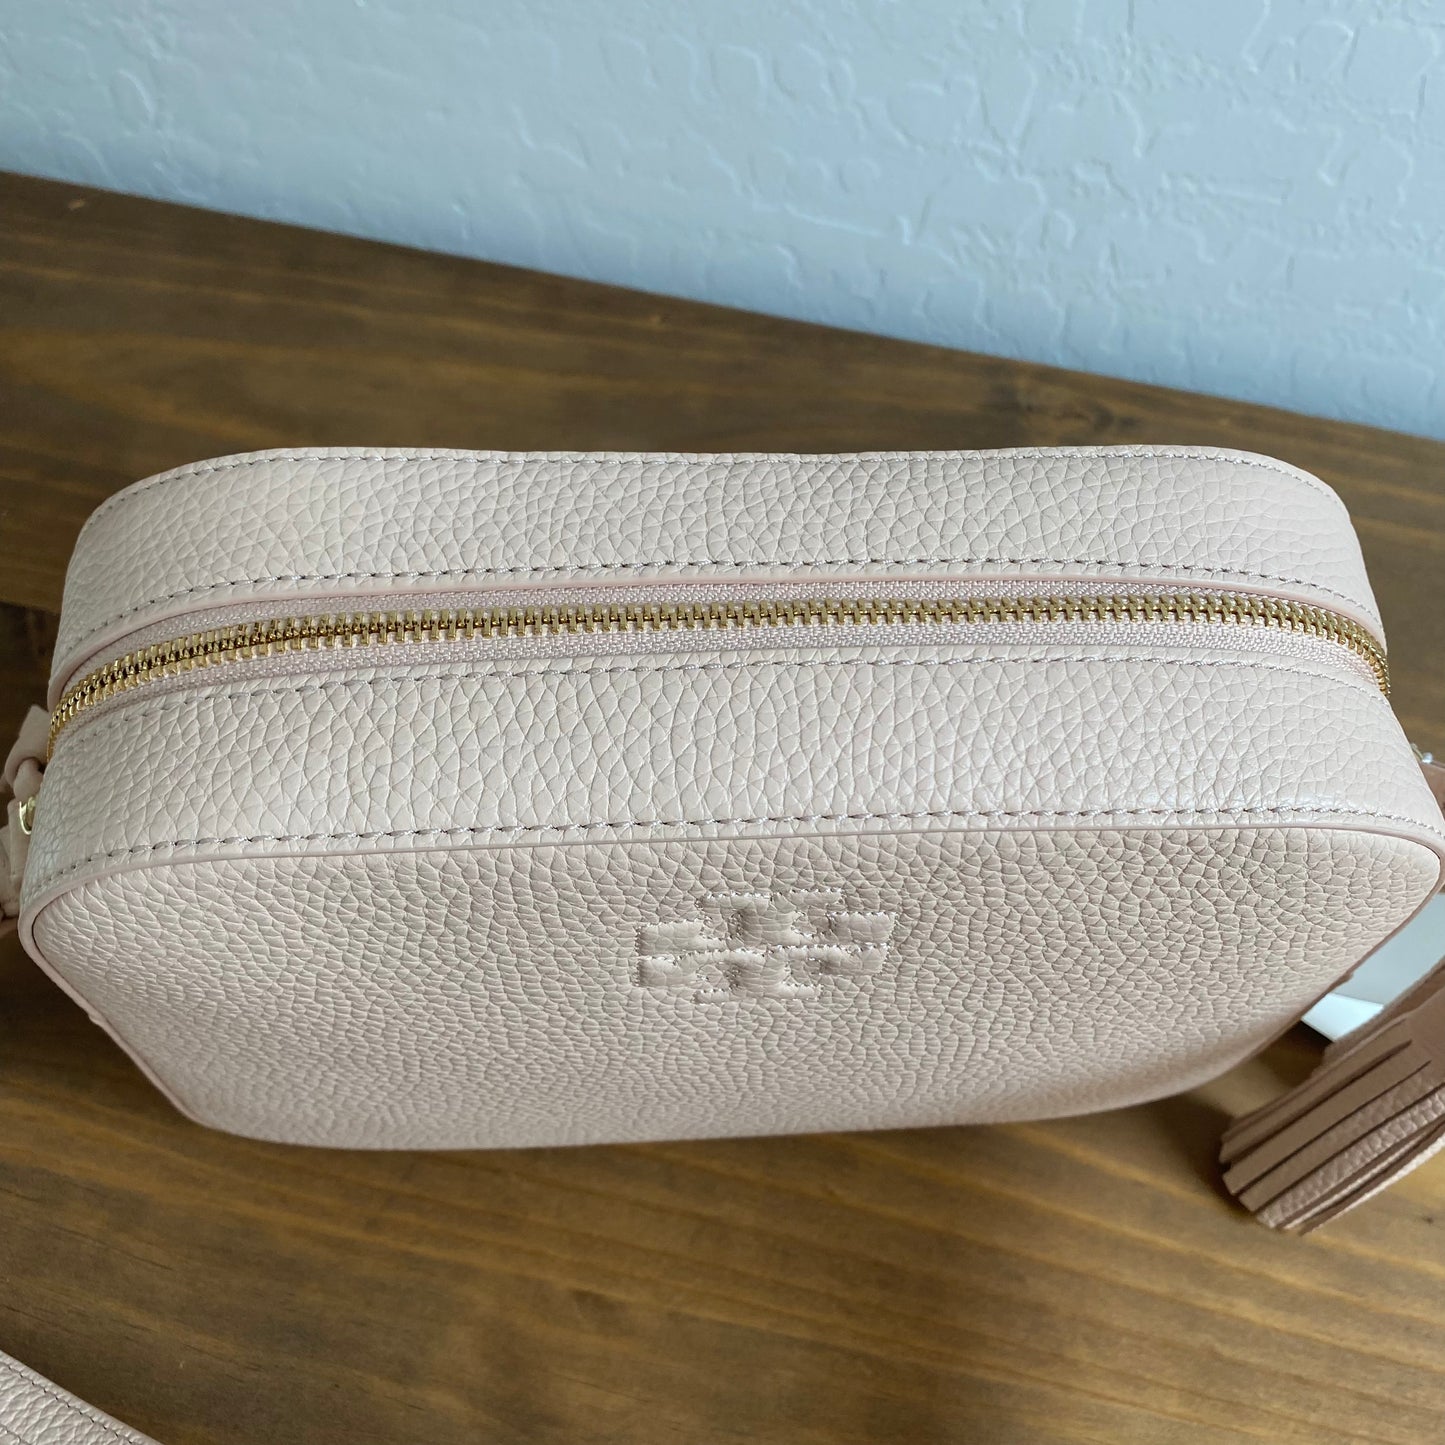 Tory Burch Thea Leather Shoulder Bag